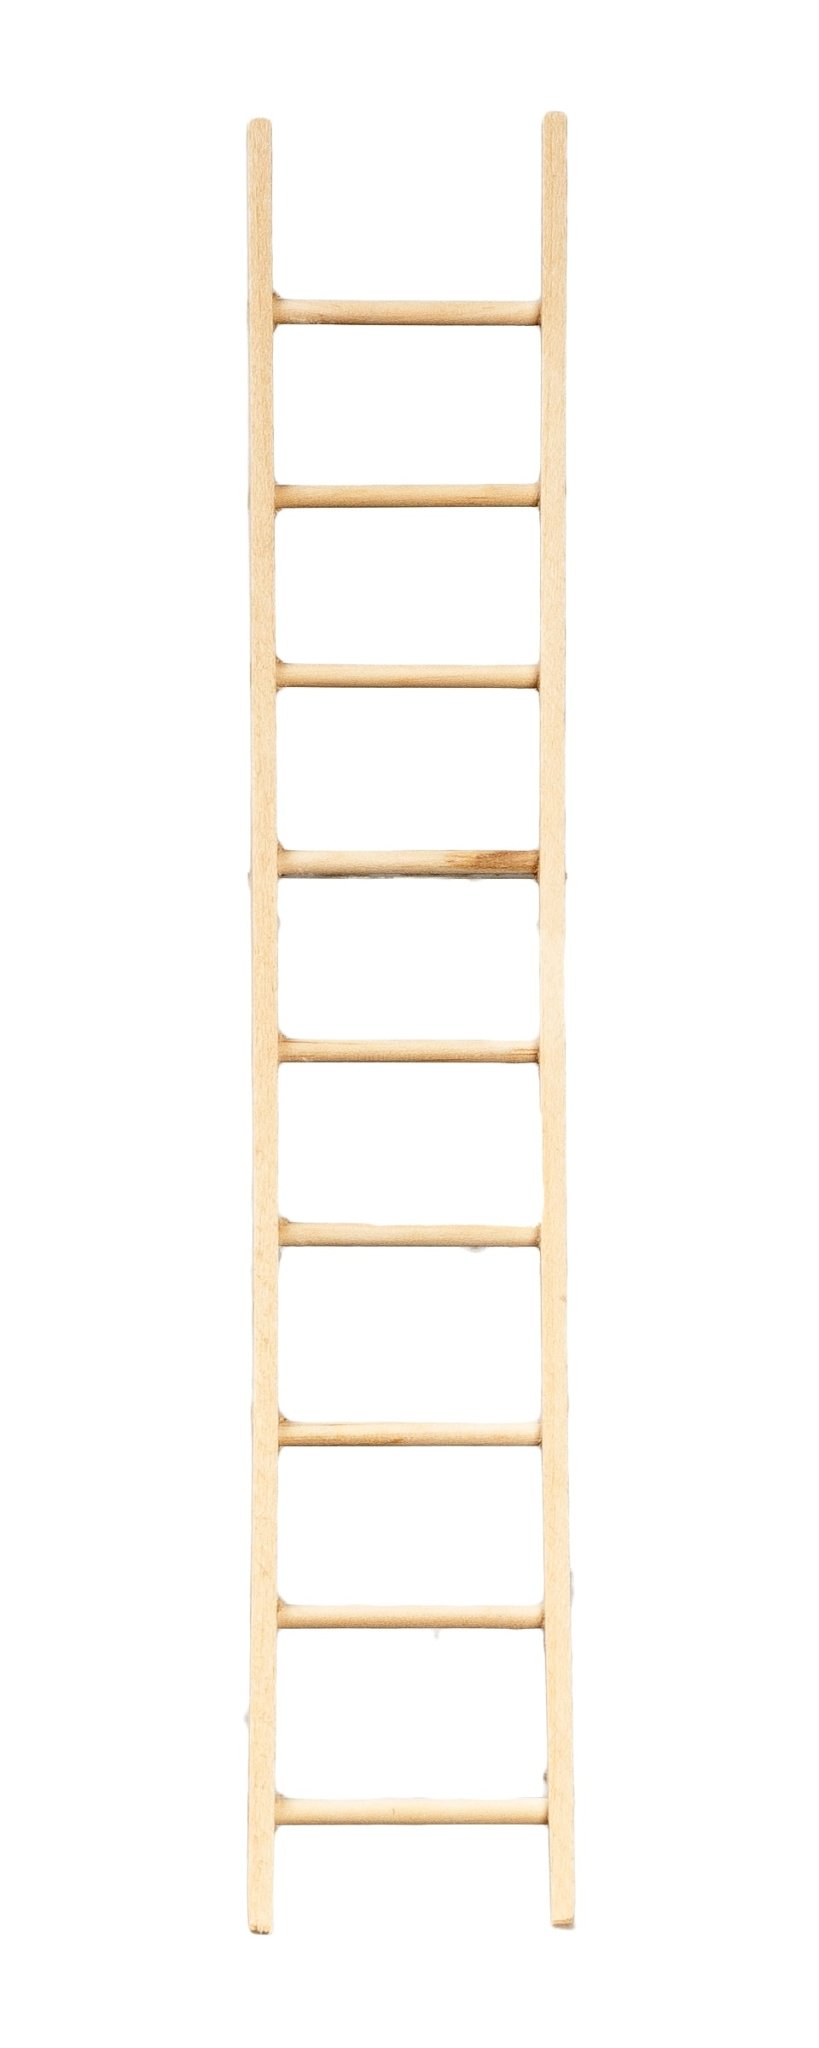 1:12 Scale Wooden Ladder - Mini Materials